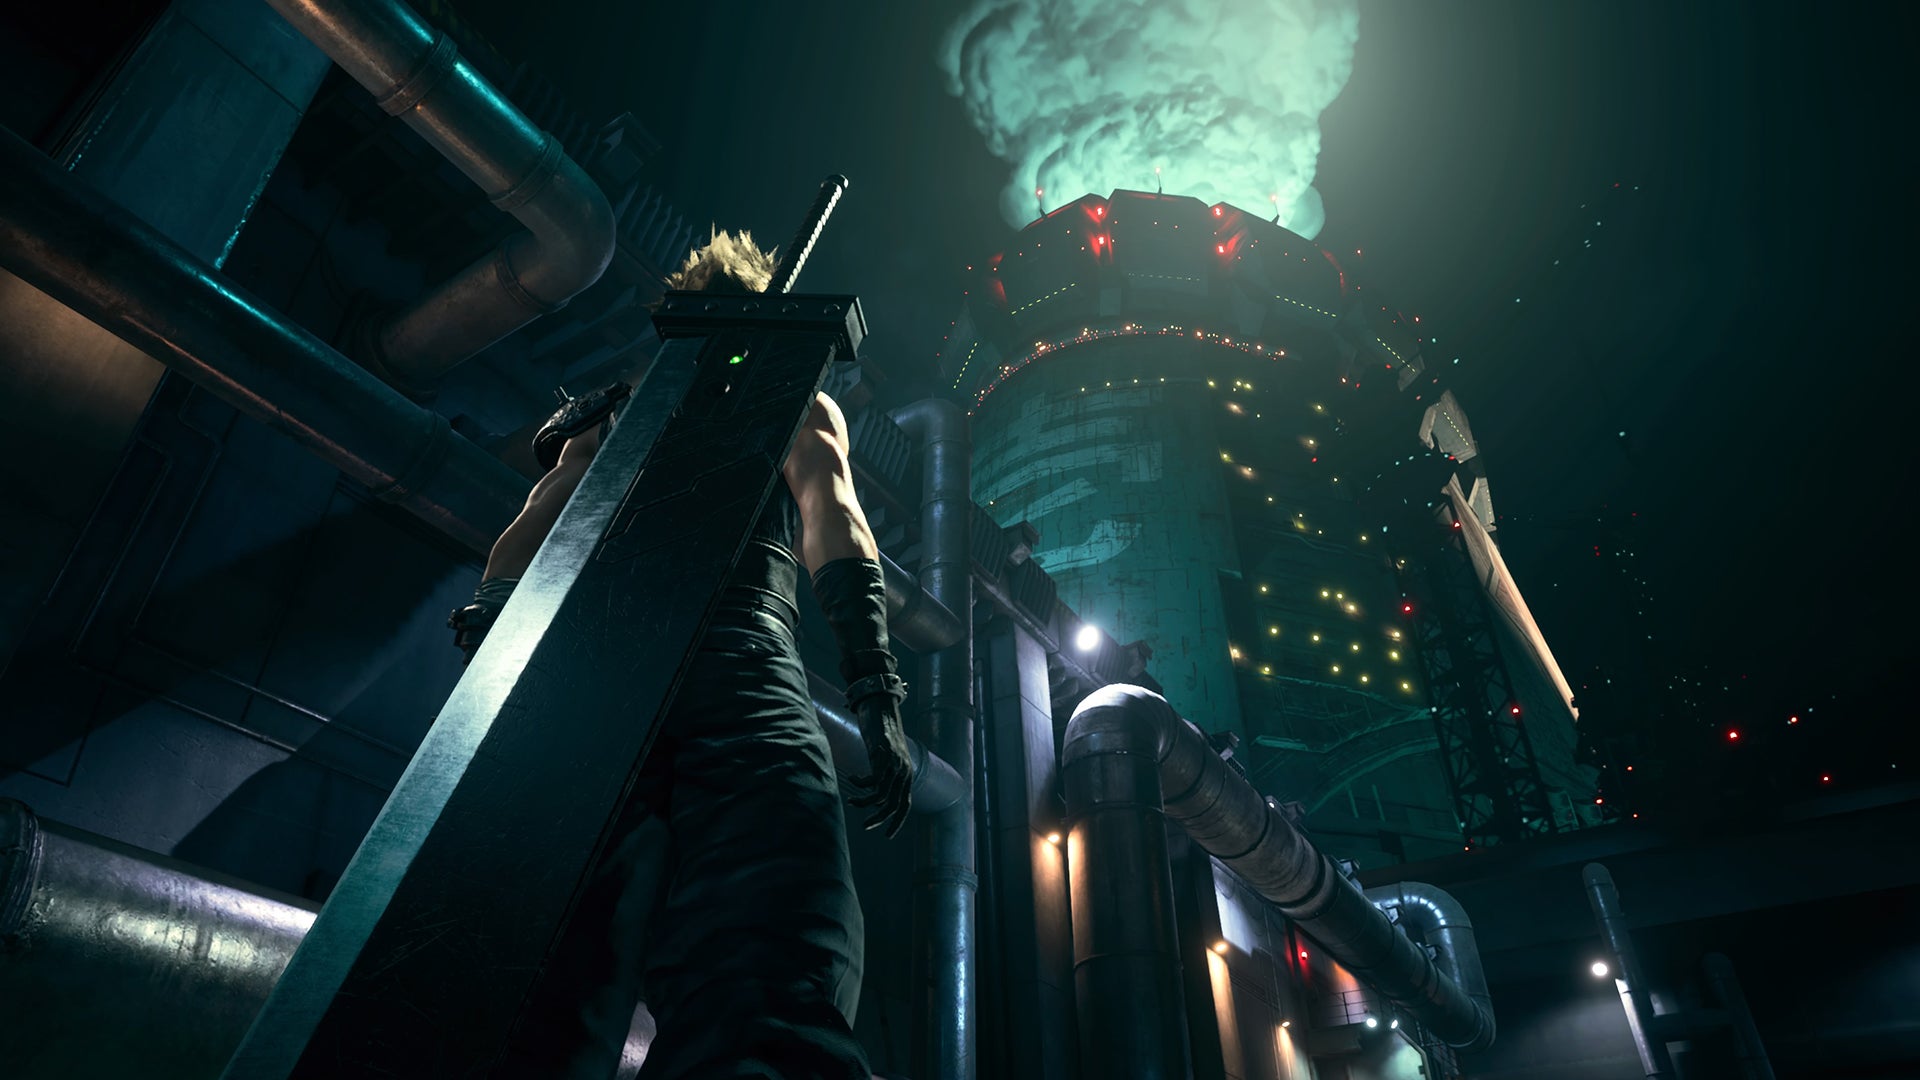 You can play Final Fantasy 7 Remake with an actual buster sword now